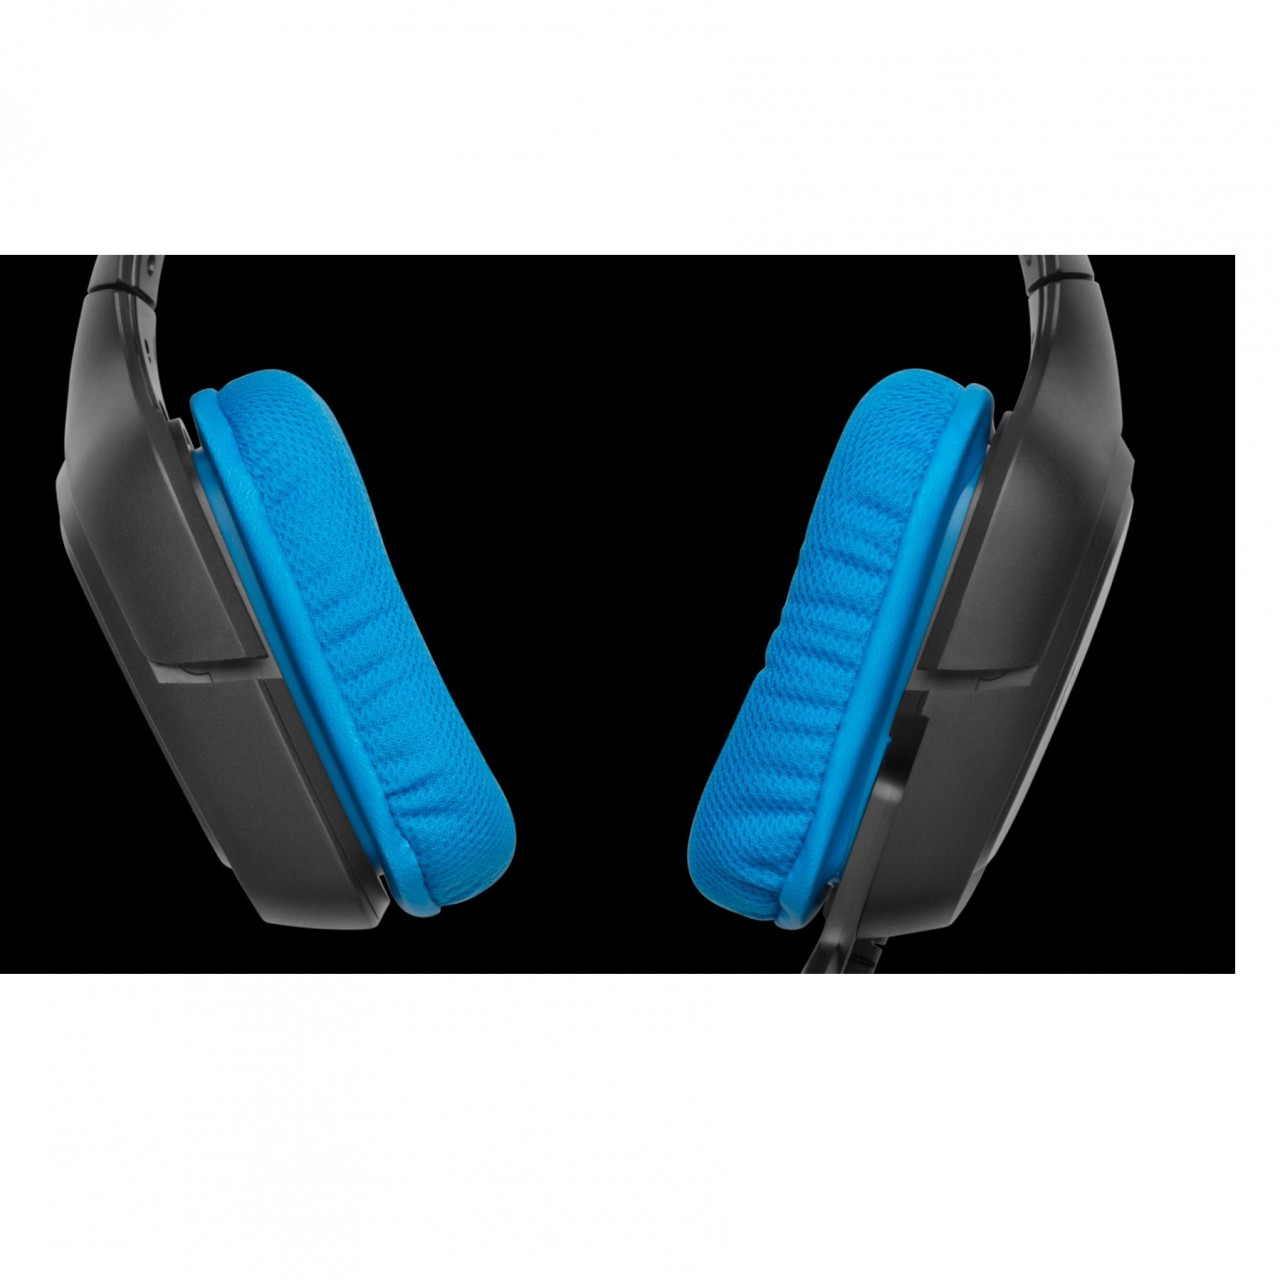 Logitech G430 Dolby DTS 7.1 Surround Sound Gaming Headset With Unidirectional Microphone